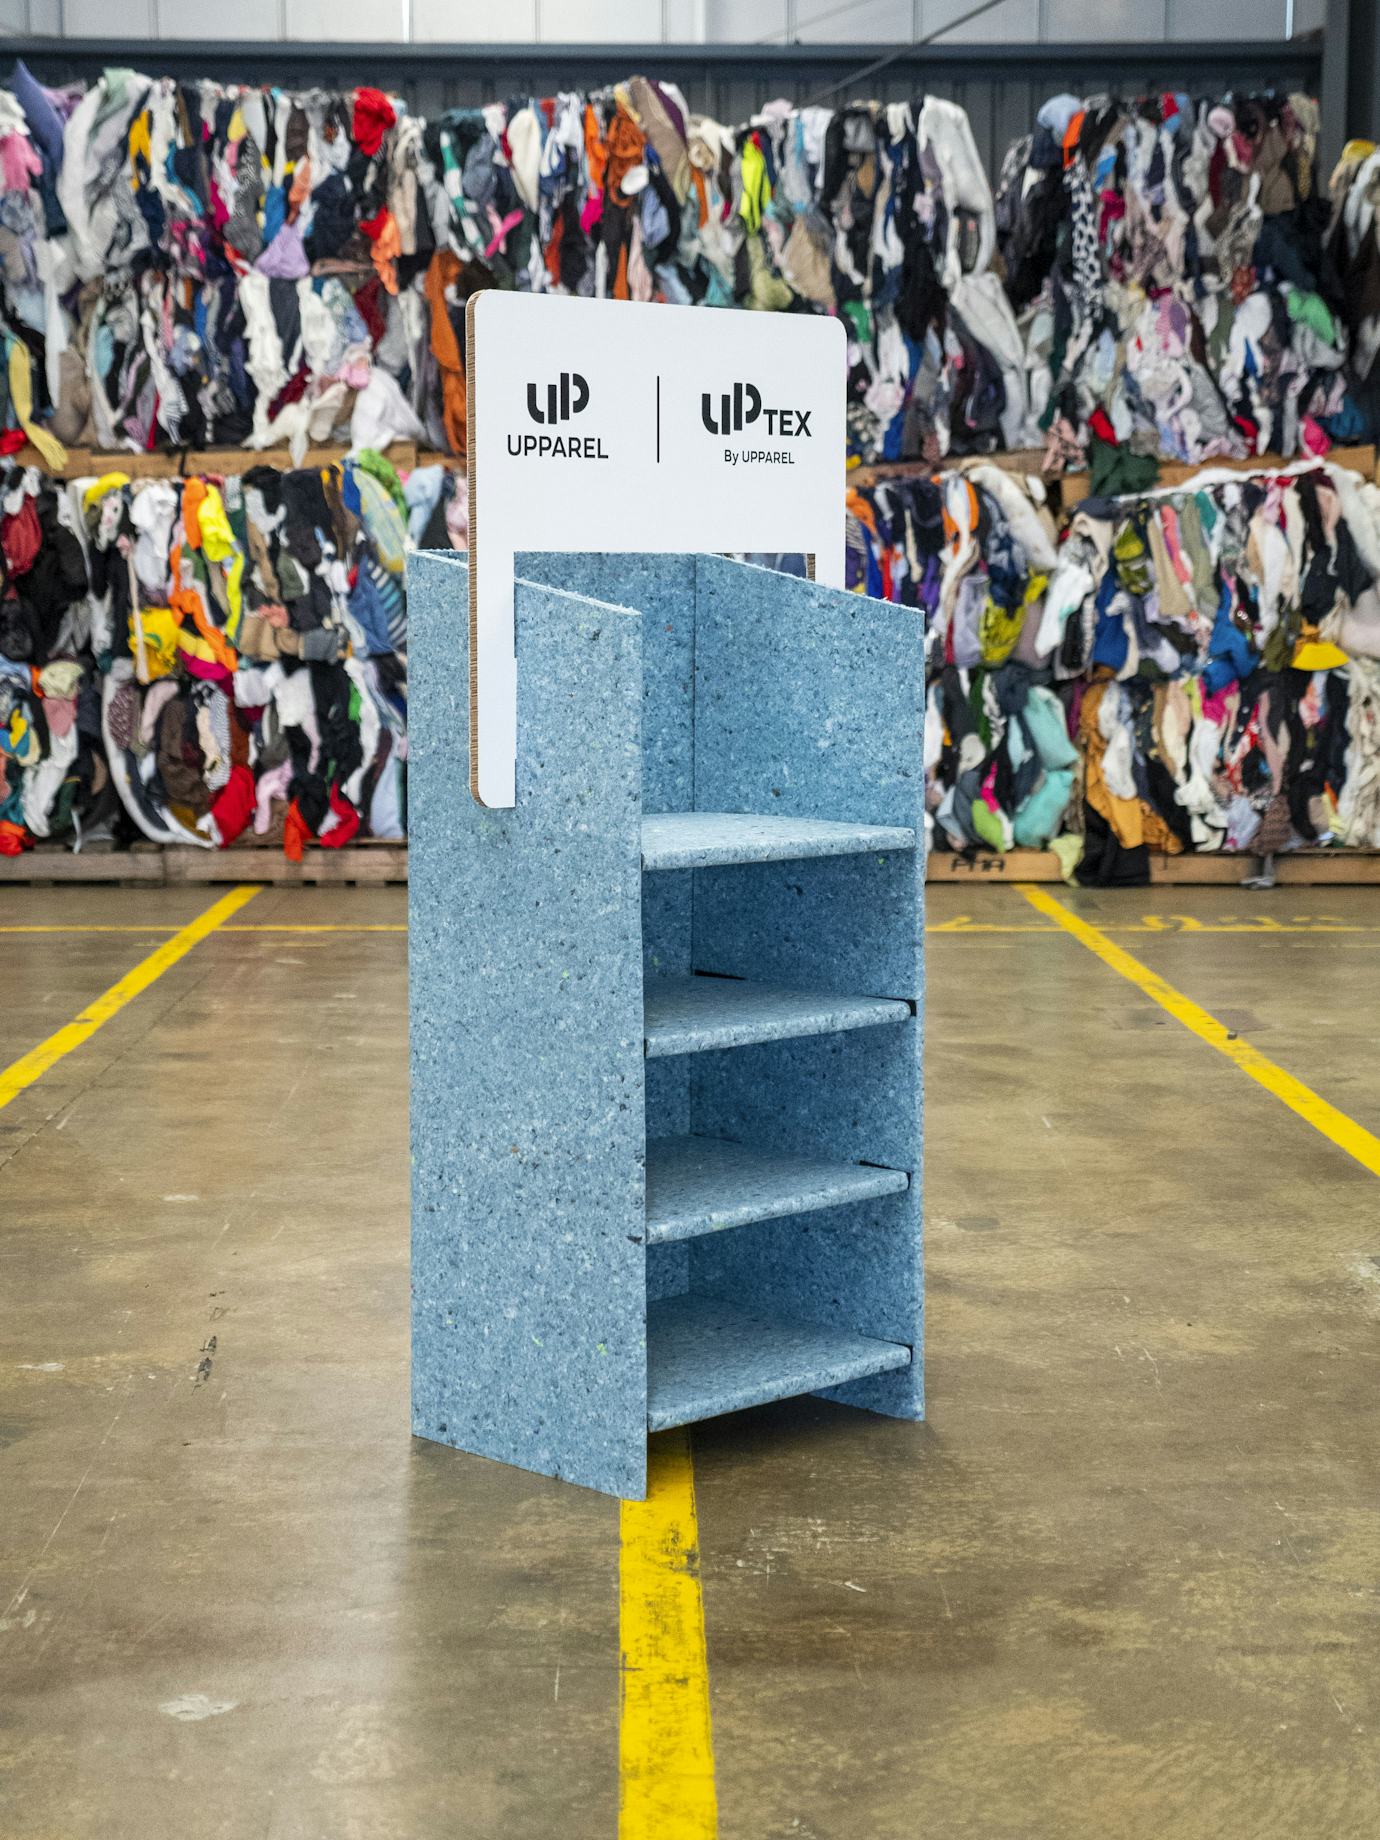 Stand made from UPtex recycled textiles material. Image Source: UPPAREL